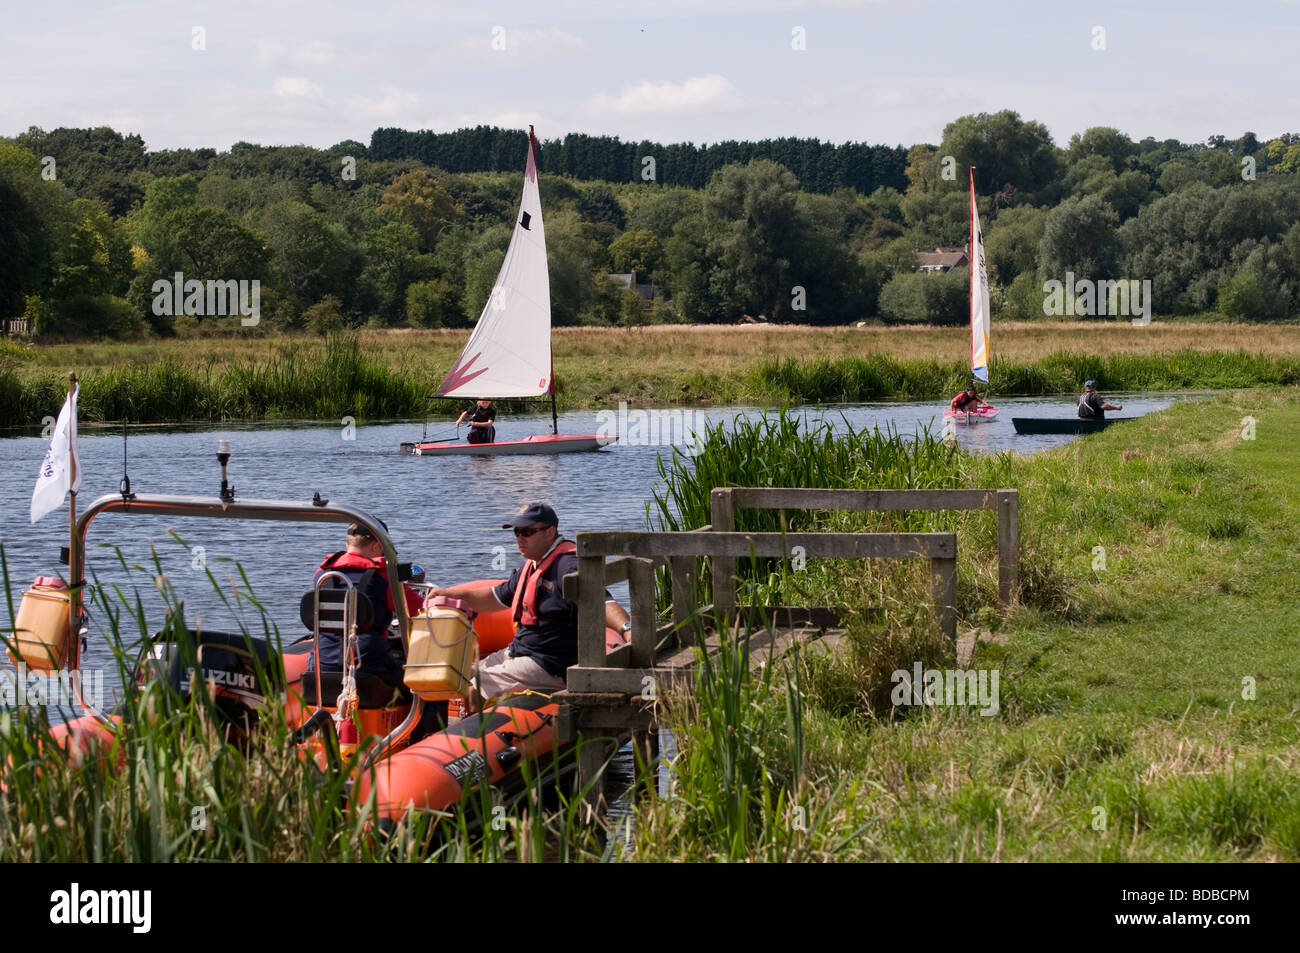 People sailing on the River Stour at Friar's Meadow in Sudbury, Suffolk, England Stock Photo